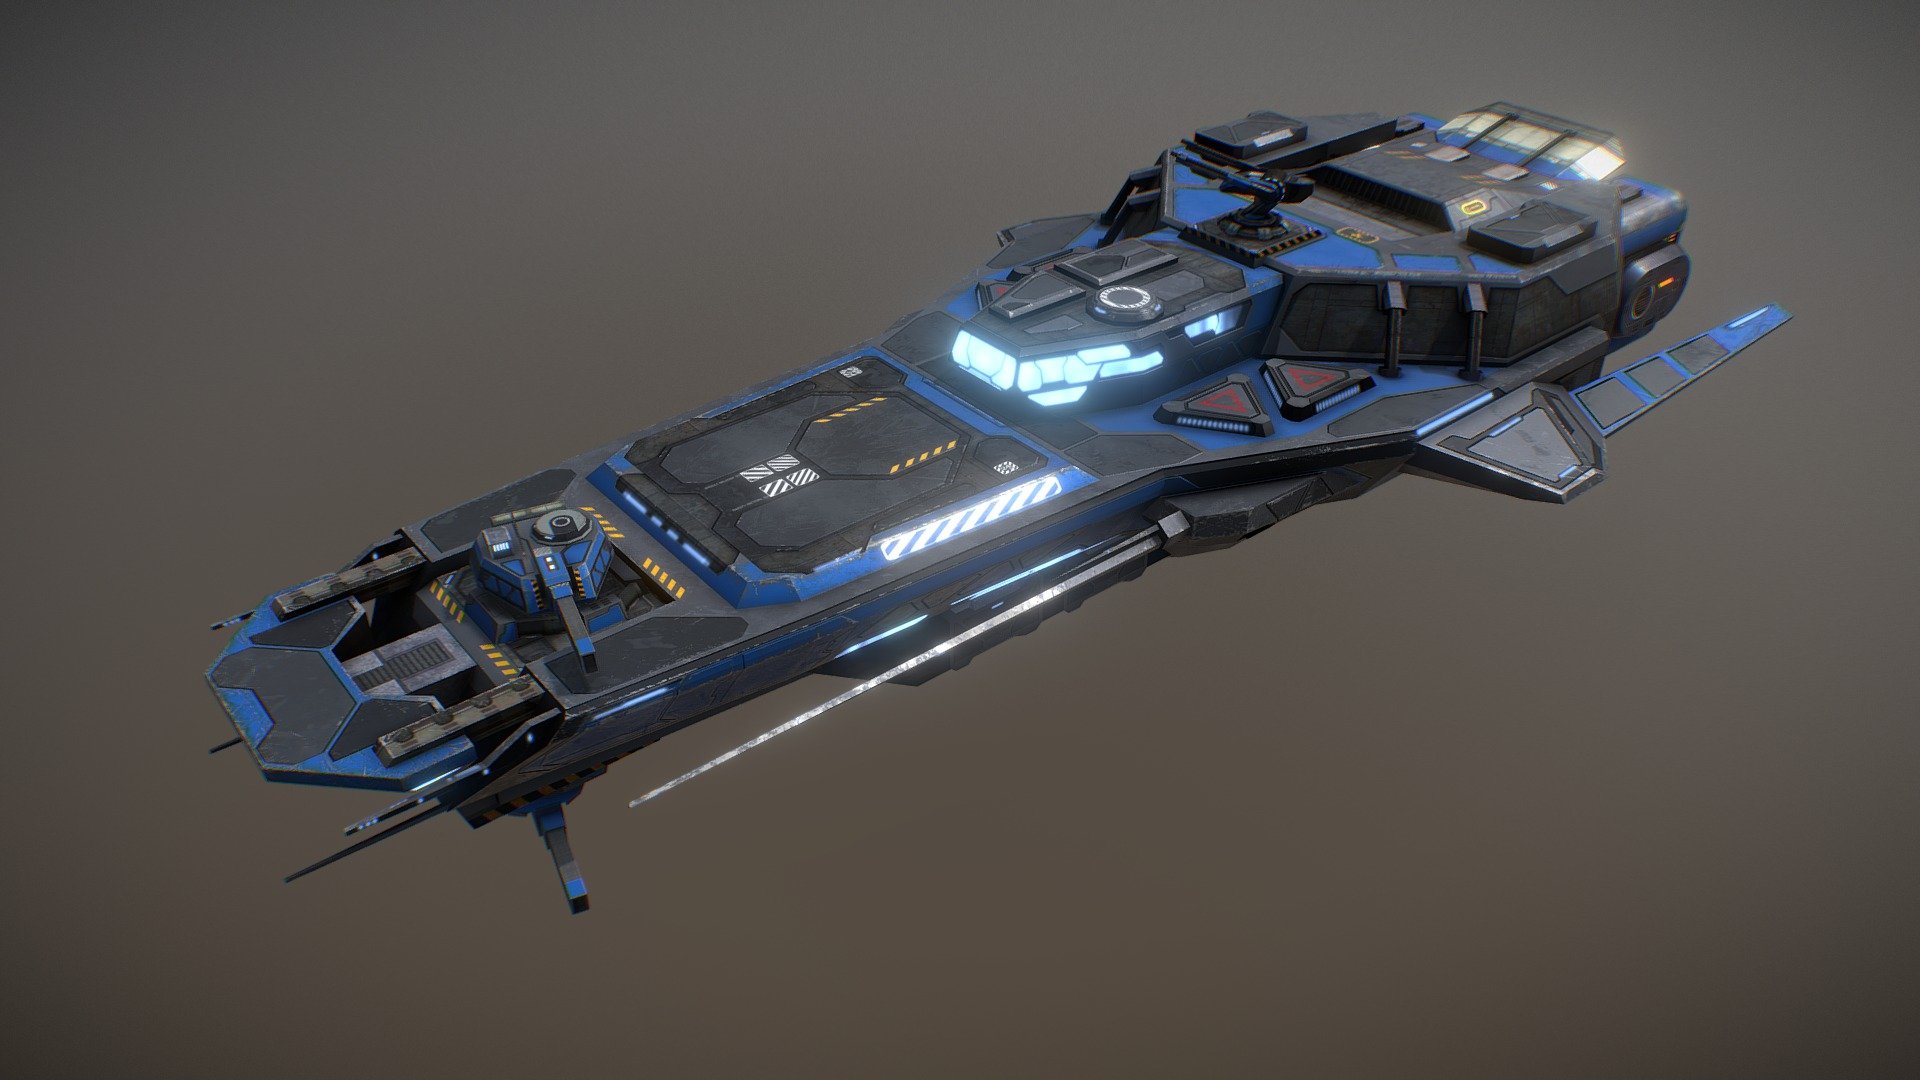 Praetor Gunship is a low poly optimized 3d asset perfect for real-time applications. All assets use include a Substance Material and multiple texture sets. Also contains 4 turret assets and 4 engine assets to further customize the ship.

Features:



Substance Materials to customize paint color, emission color and weathering level.



PBR textures (Albedo, Metallic, Metallic+Smoothness(A), Roughness. Illumination and AO)



4 Example texture sets: Pristine and Weathered, in blue and red colors.



4 engine assets



4 turret assets (components are separated for easy animating)


 - Praetor Gunship - 3D model by VattalusAssets 3d model